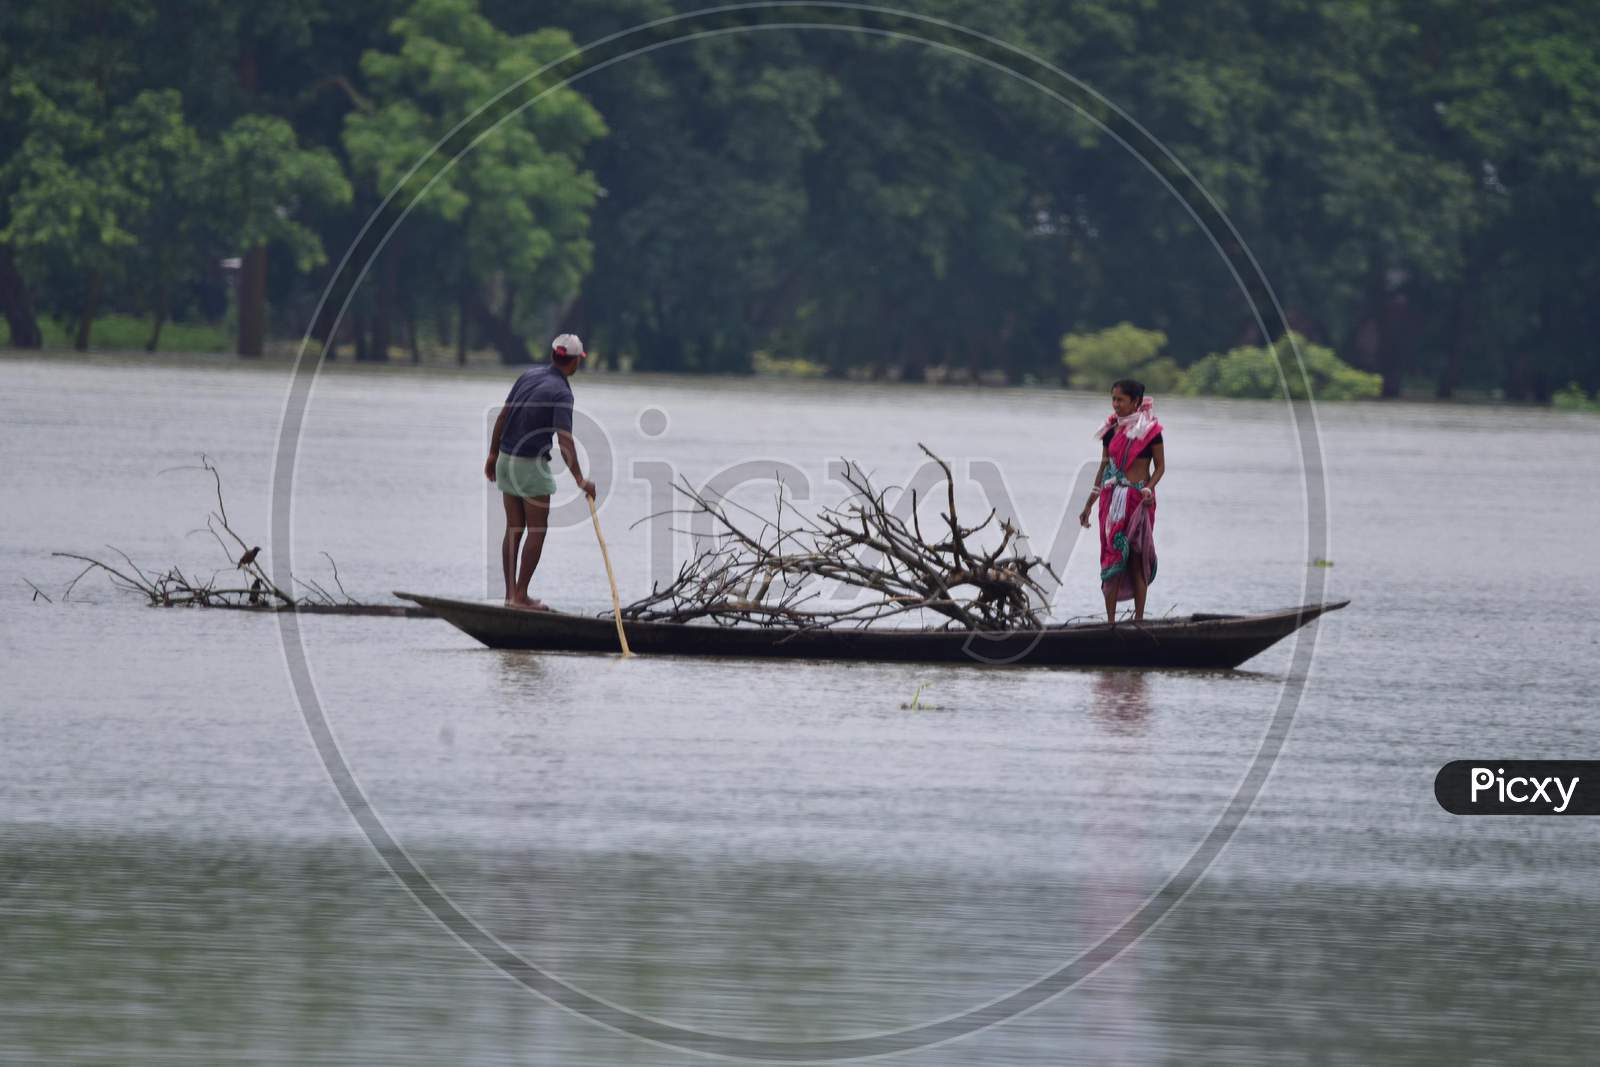 Flood Affected Villagers Travel On A Boat Towards A Safer Place During Floods  At  Sildubi Village In Morigaon District Of Assam On June 29, 2020